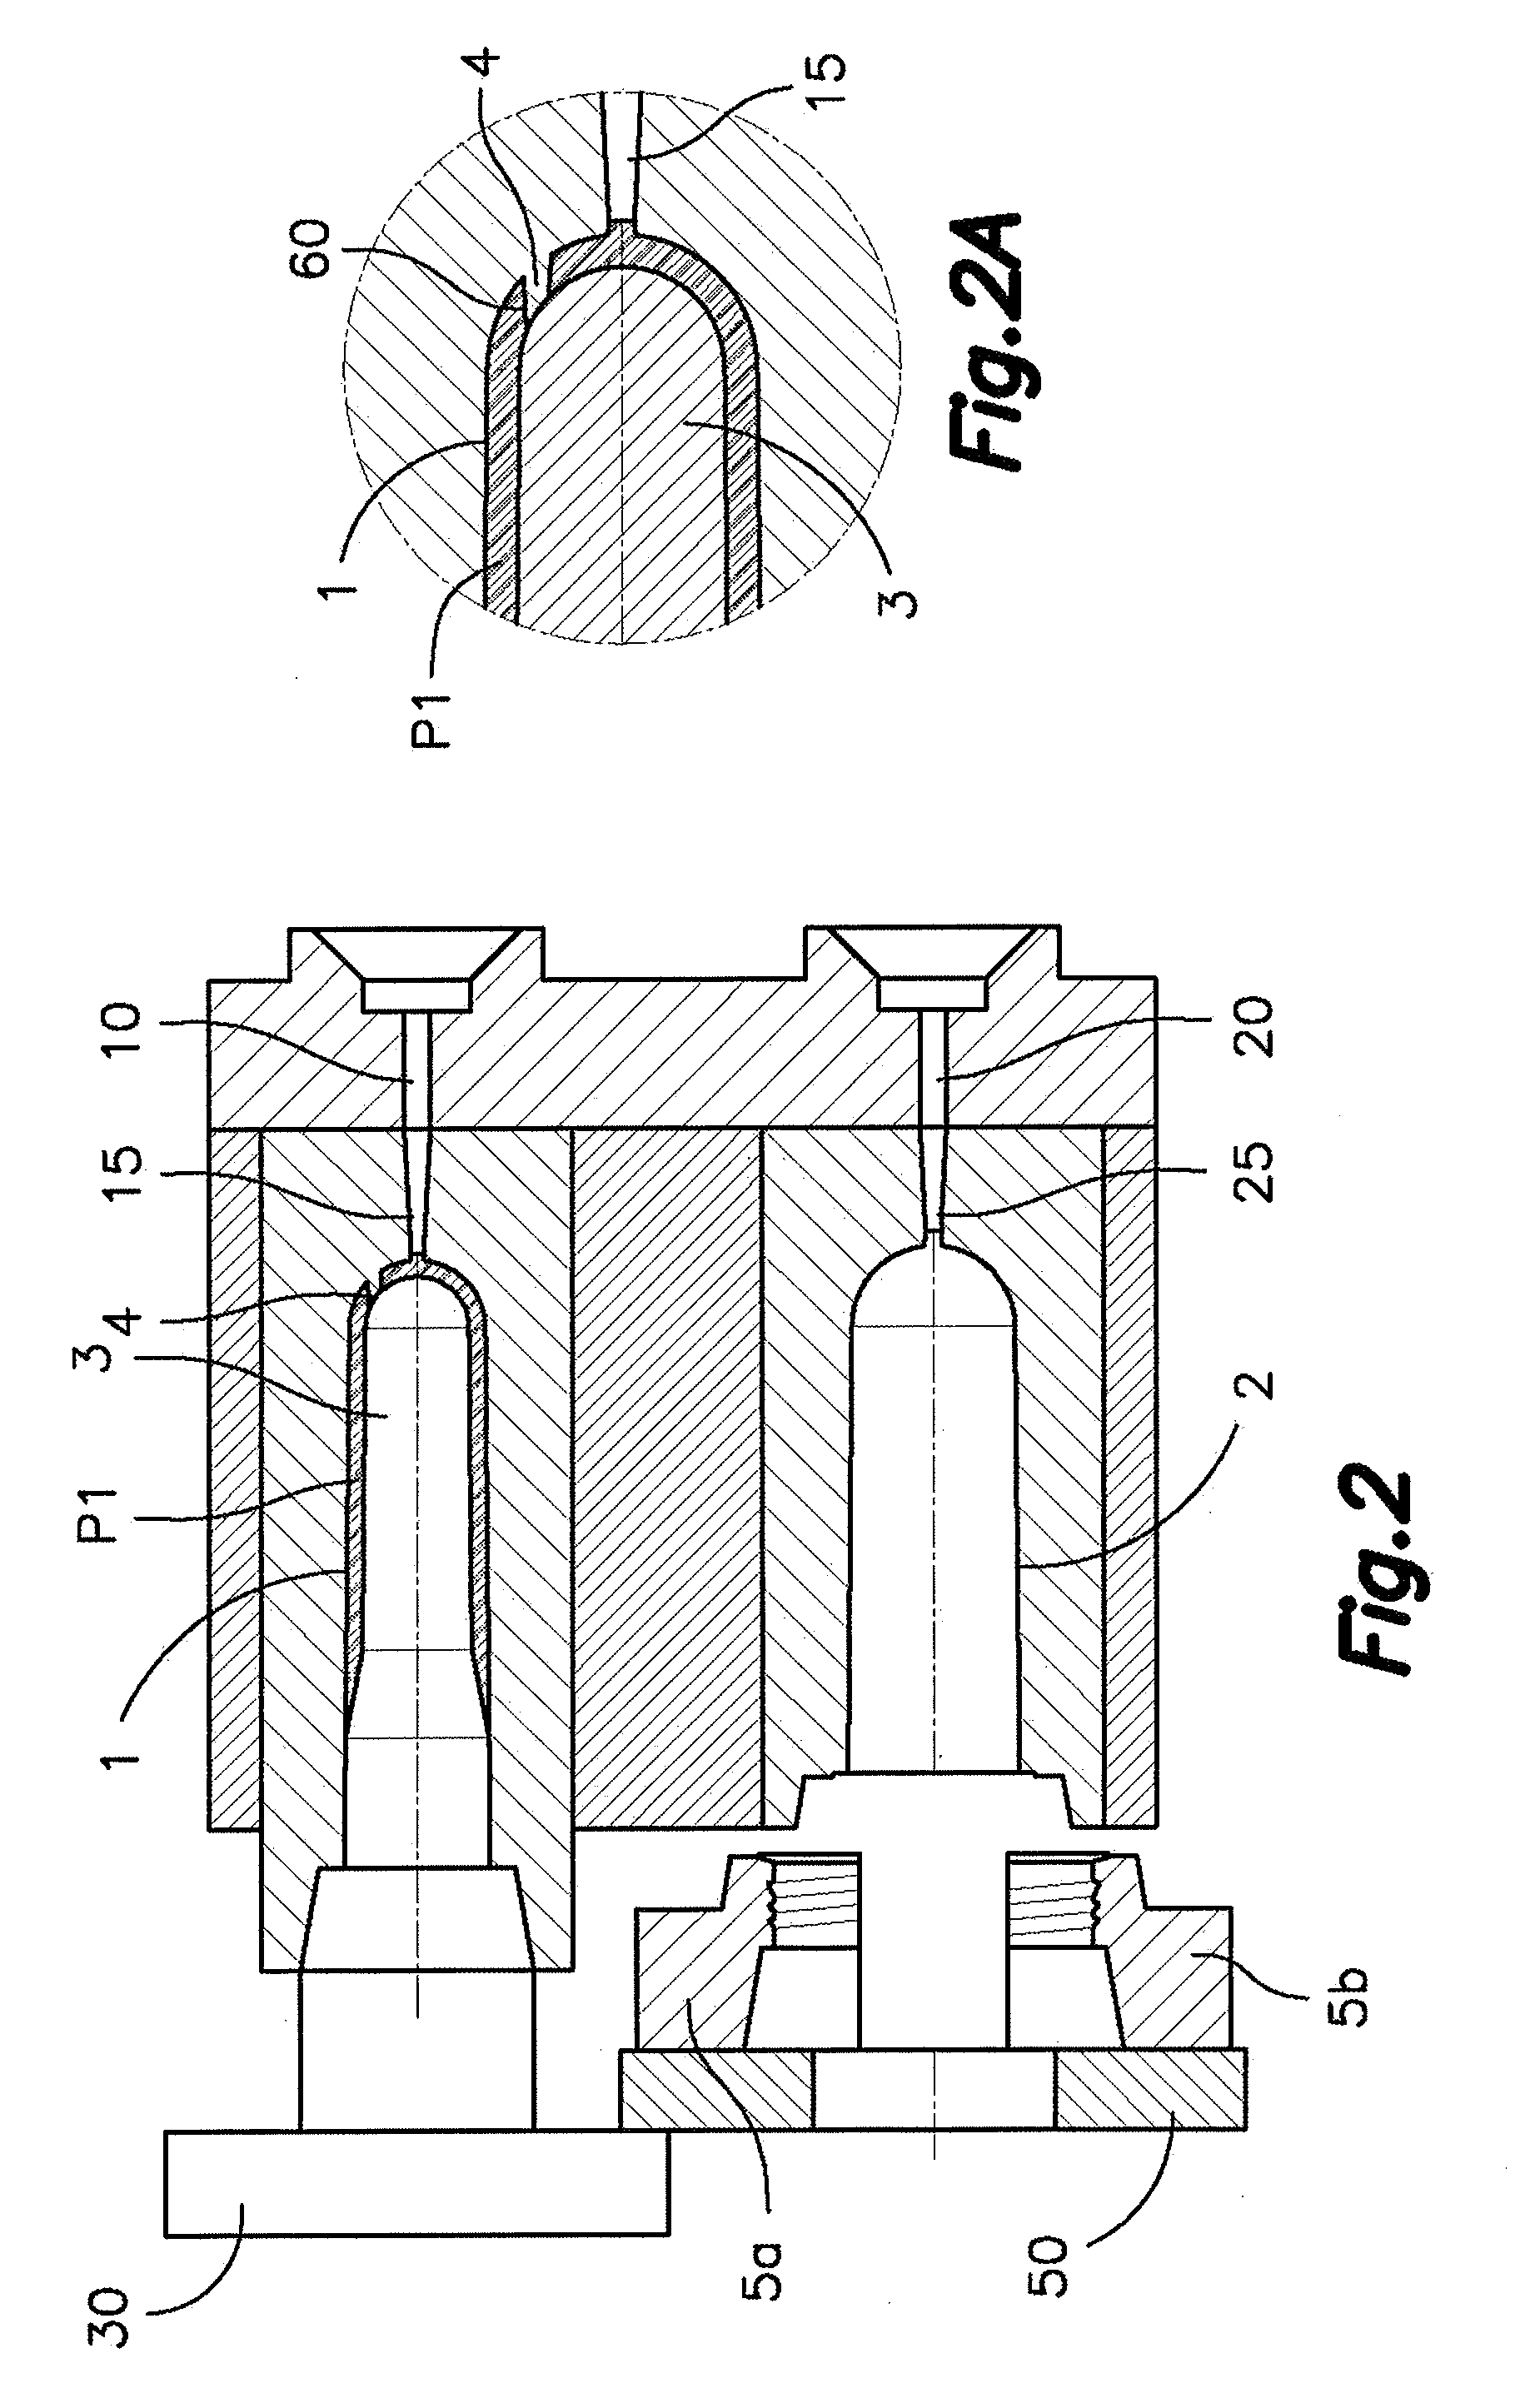 Two-layered preform obtained by injection overmolding